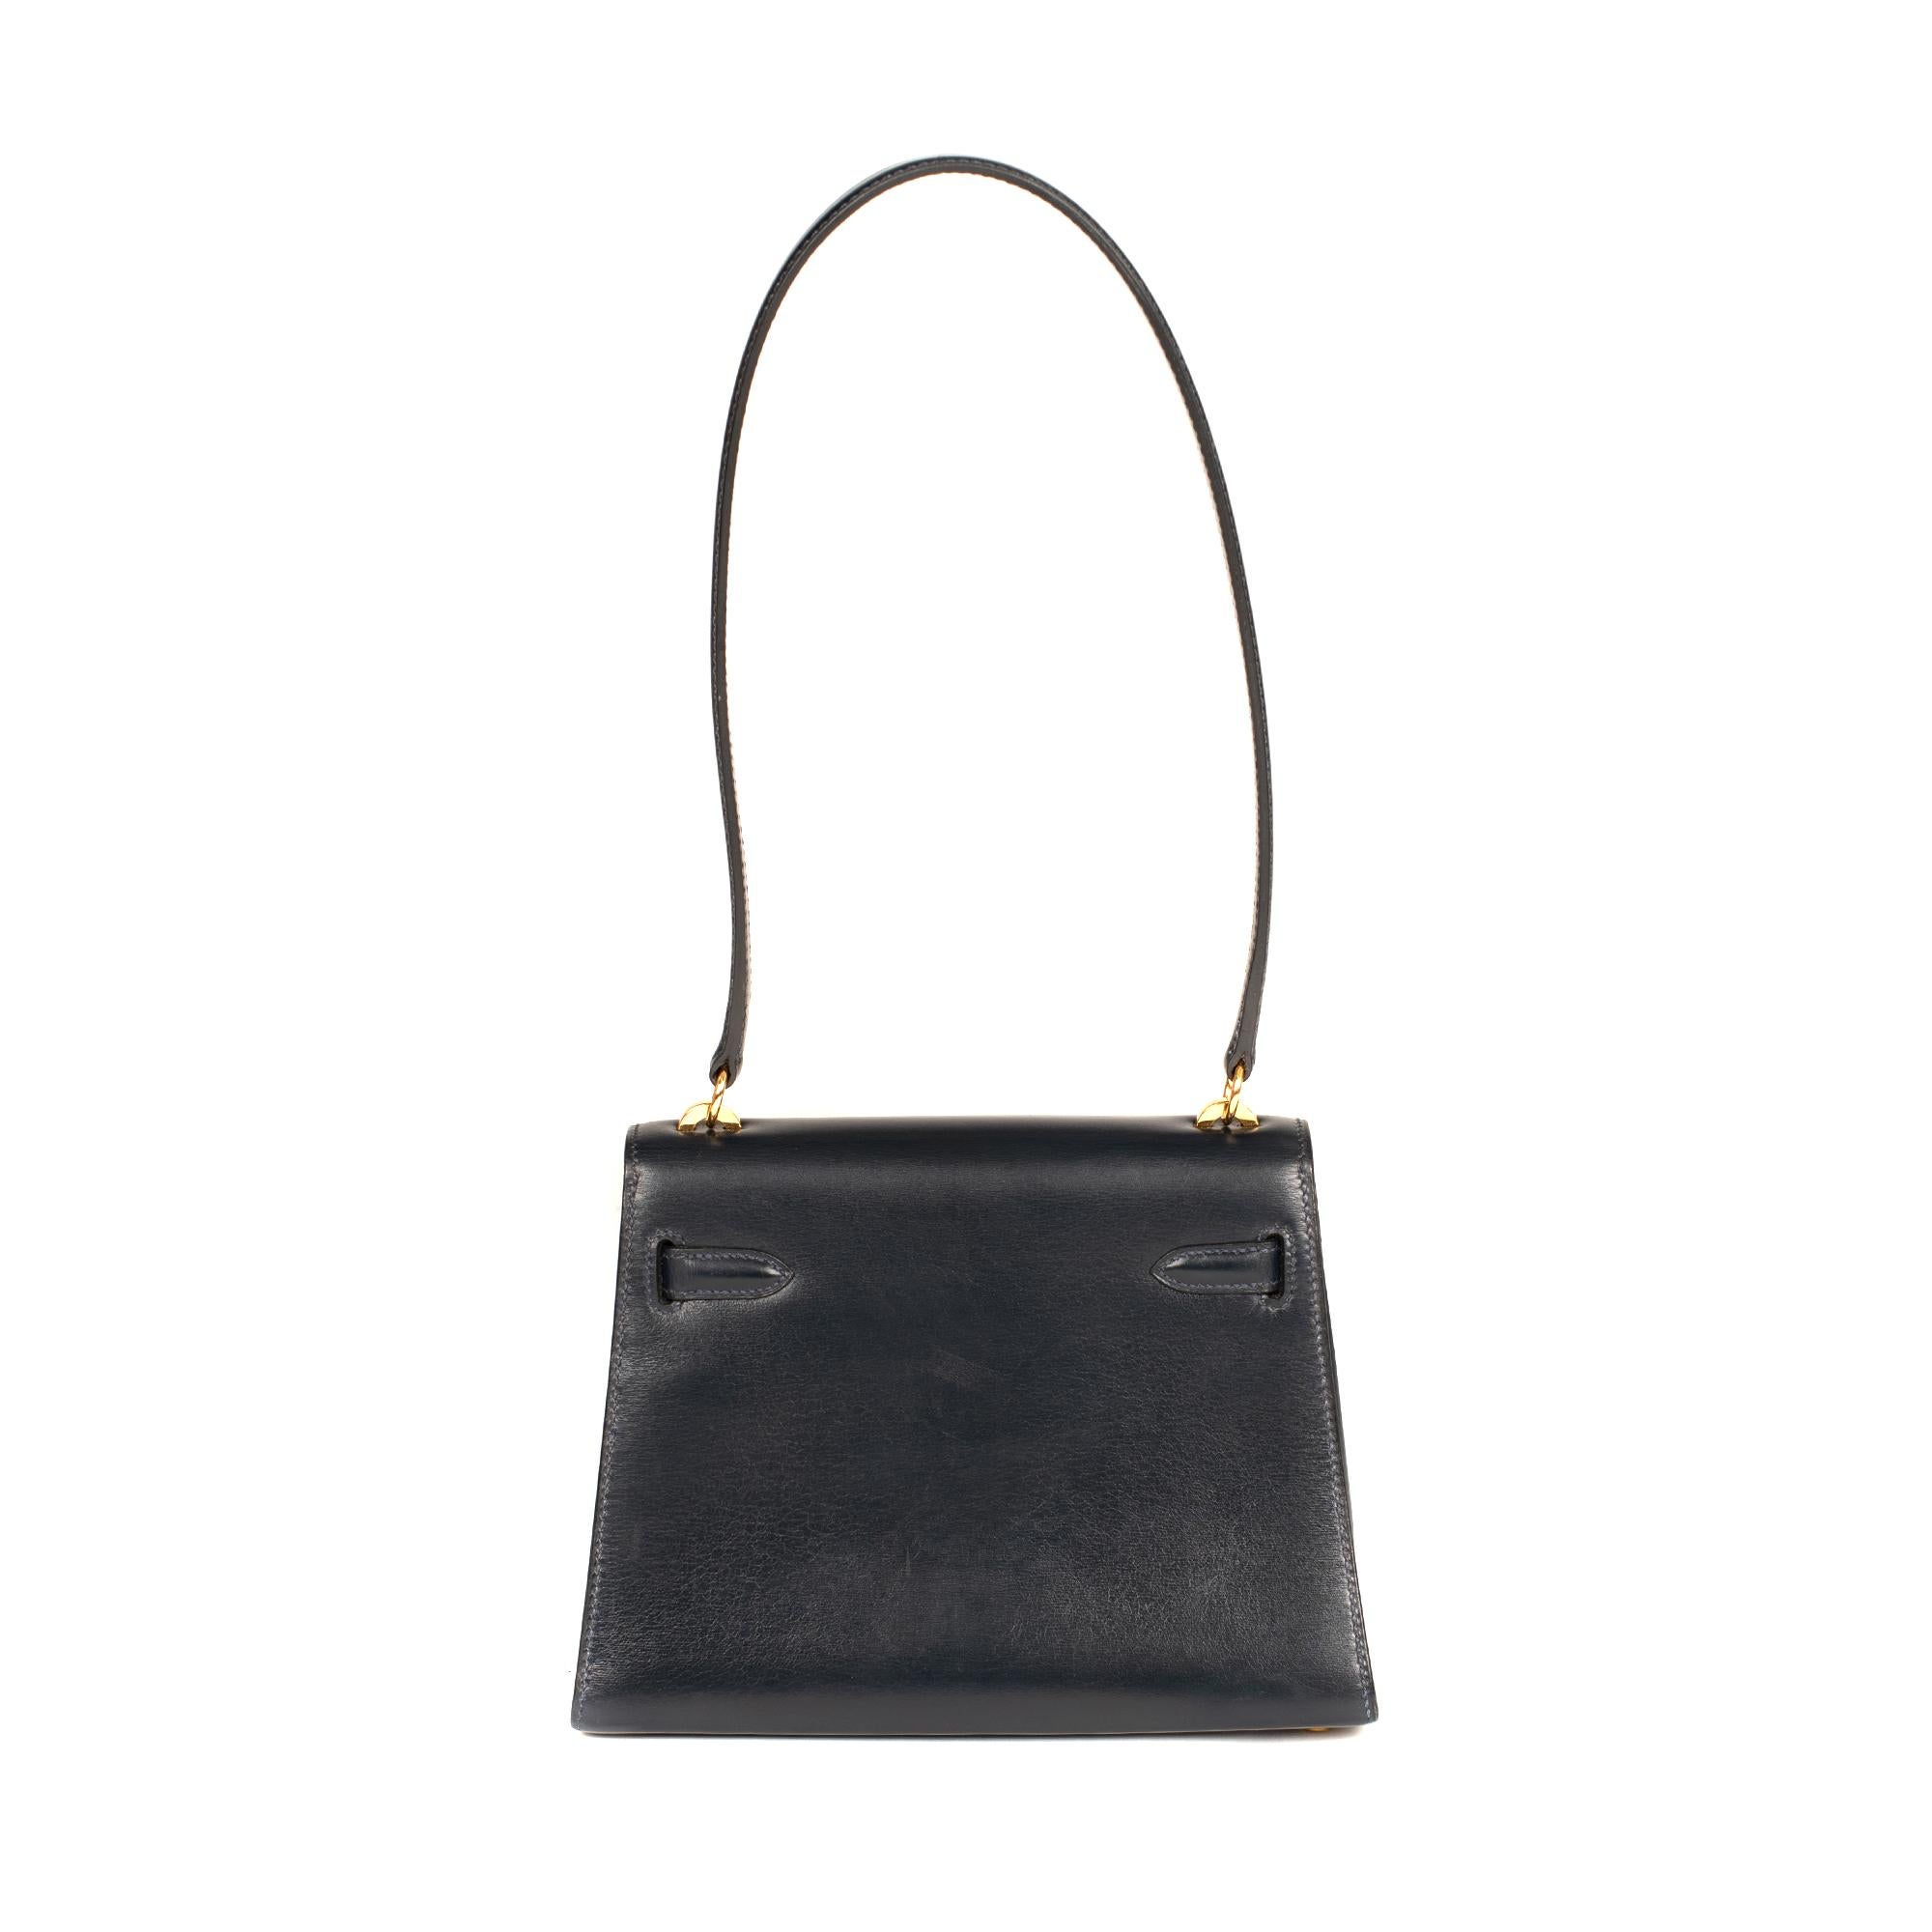 Stunning Hermes Mini Kelly handbag 20 cm in navy blue box leather, gold-plated metal hardware, navy blue leather handle allowing a hand or shoulder wear.

Closure on flap.
Lining in blue leather, one patch pocket.
Signature: 